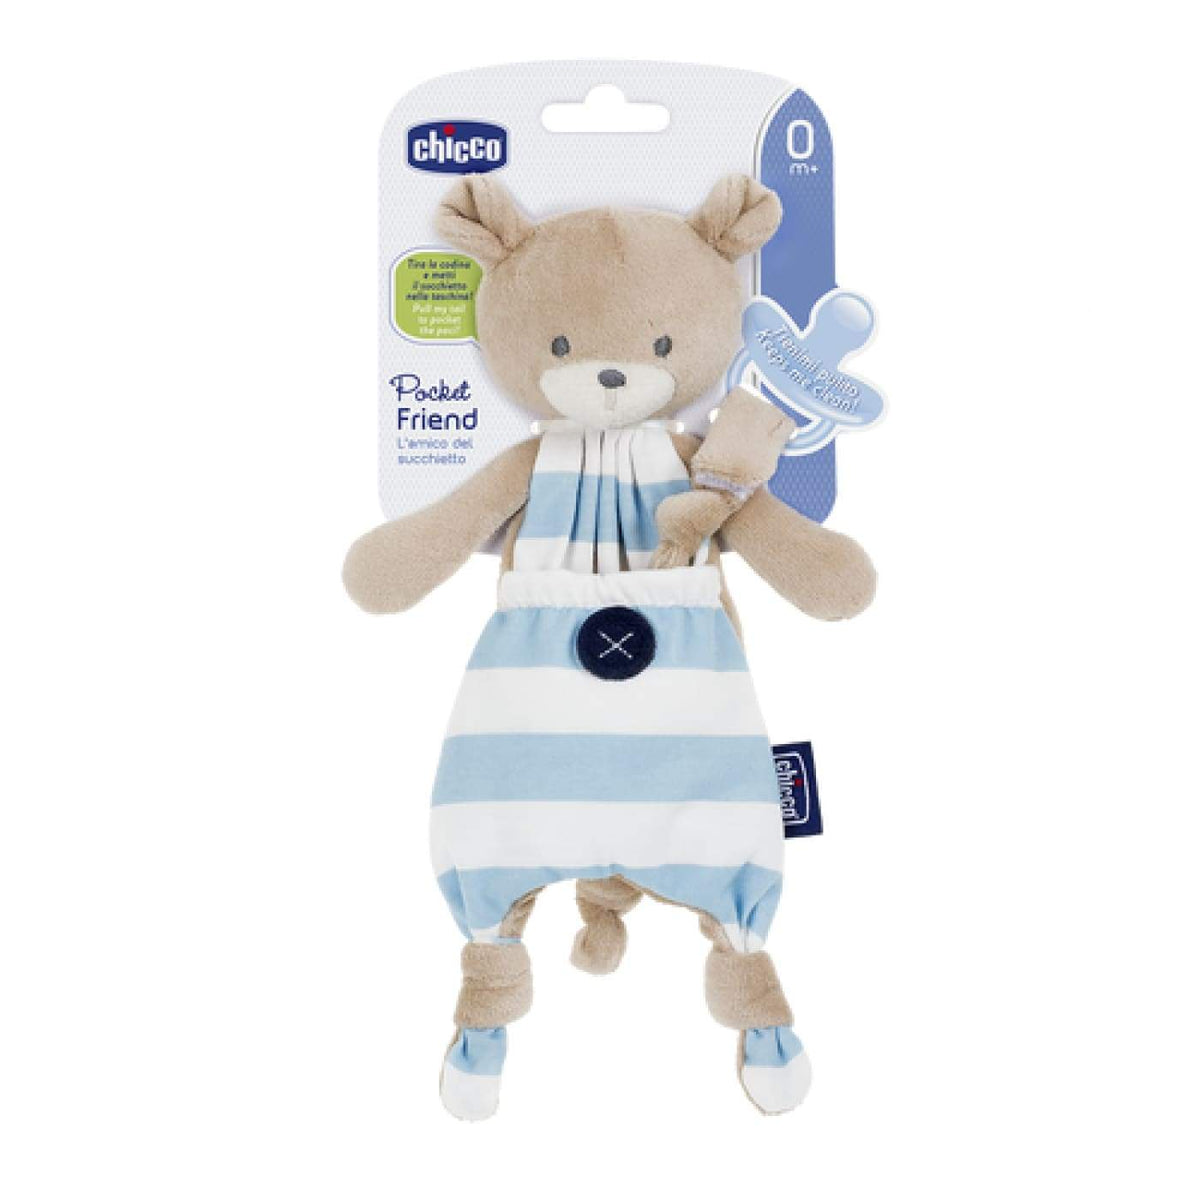 Chicco Pocket Friend - Blue - TOYS &amp; PLAY - BLANKIES/COMFORTERS/RATTLES